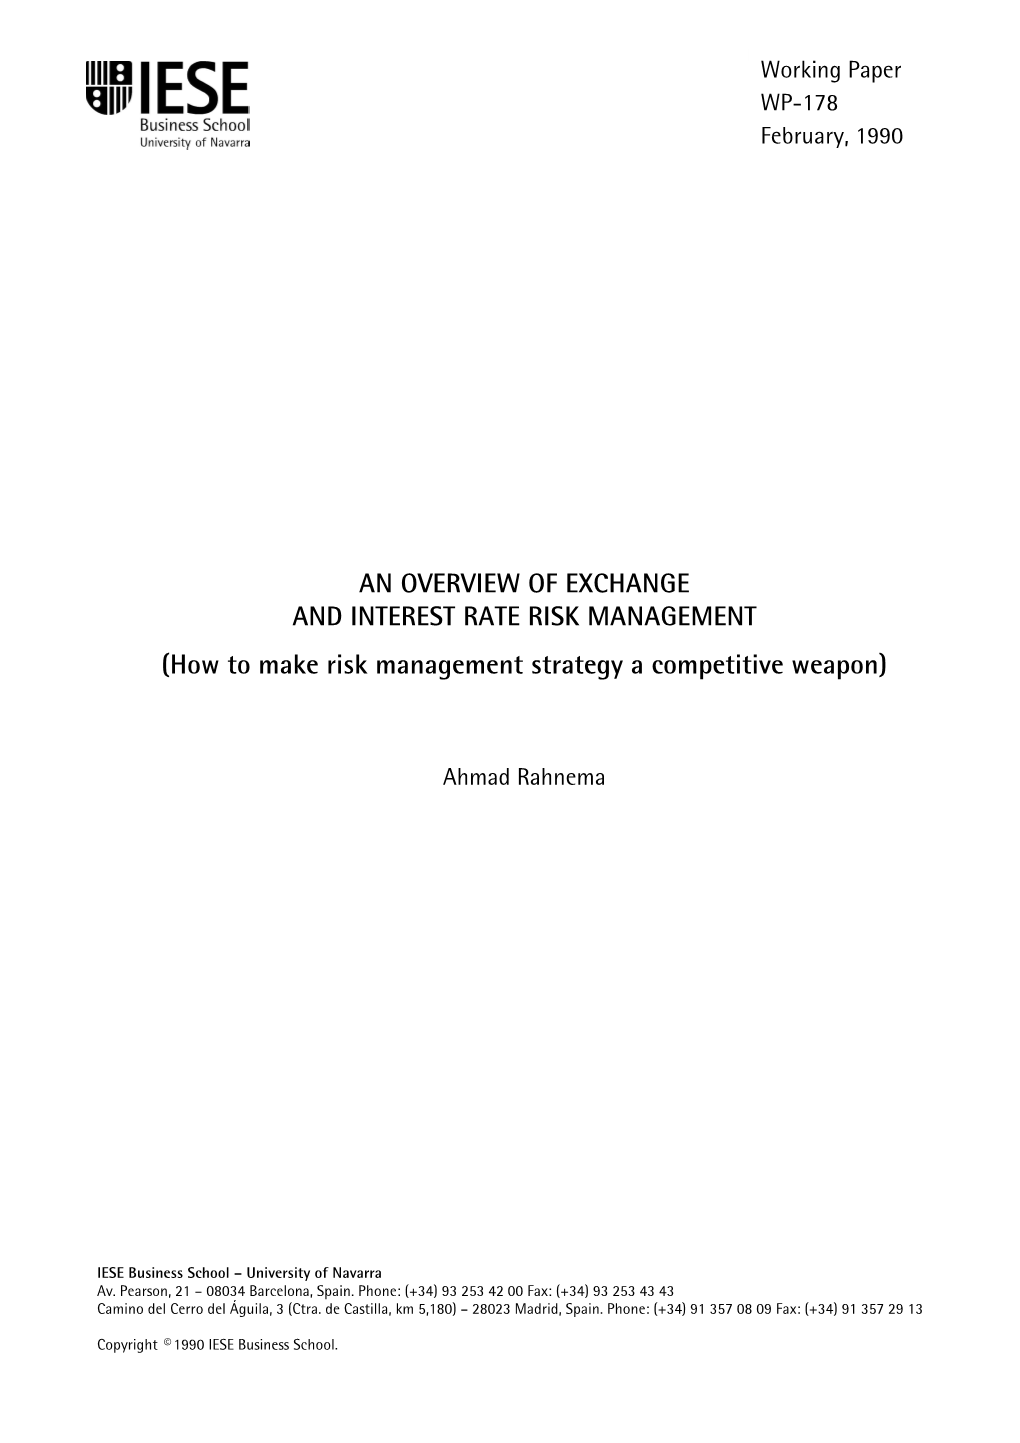 AN OVERVIEW of EXCHANGE and INTEREST RATE RISK MANAGEMENT (How to Make Risk Management Strategy a Competitive Weapon)